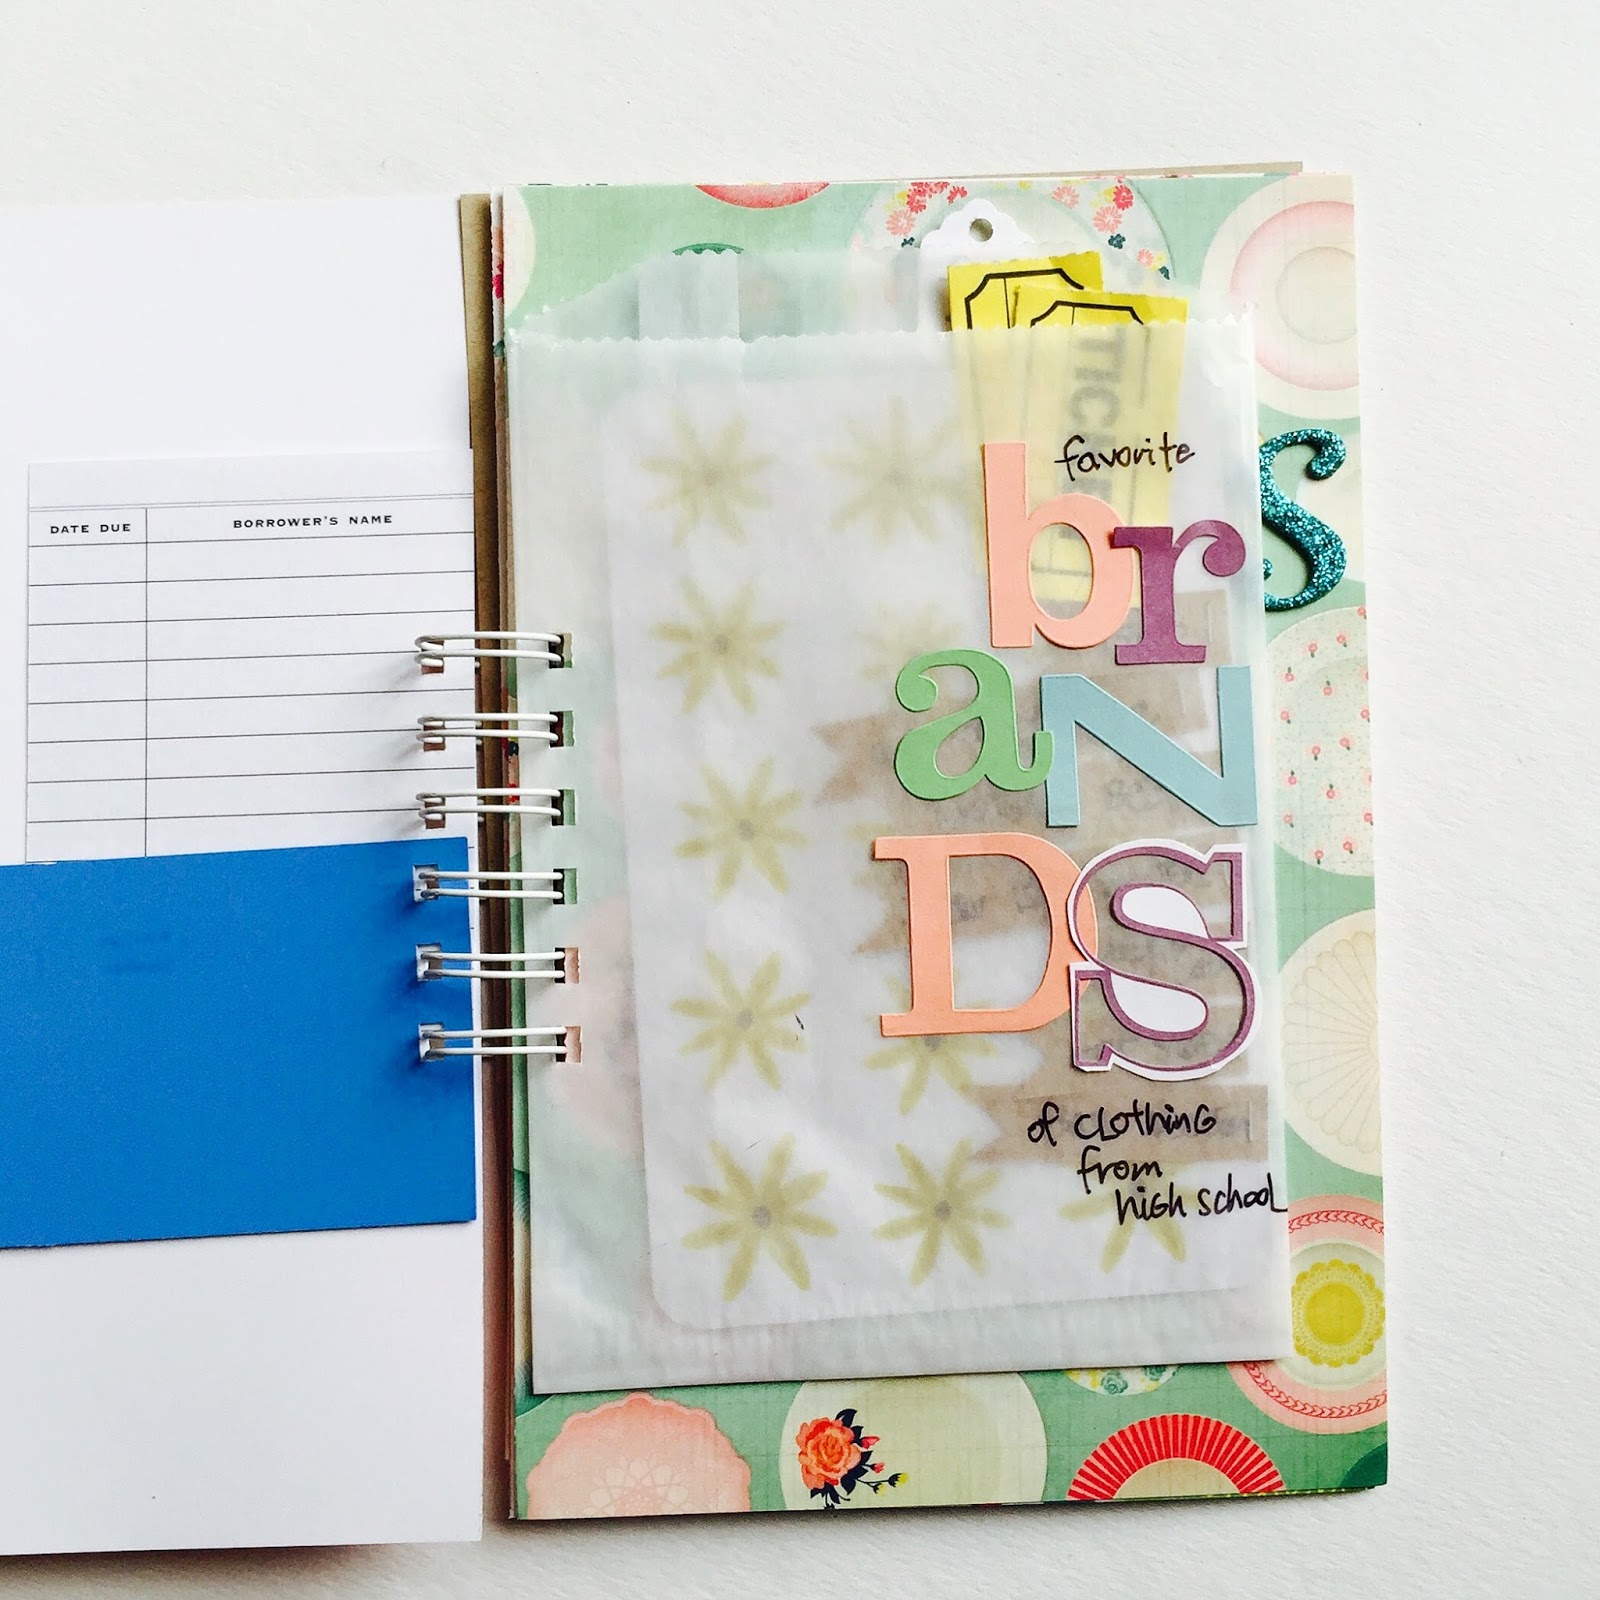 What I'm using in the #listersgottalist IG challenge...a Smash Book with Embellishment Pack from iloveitall.etsy.com